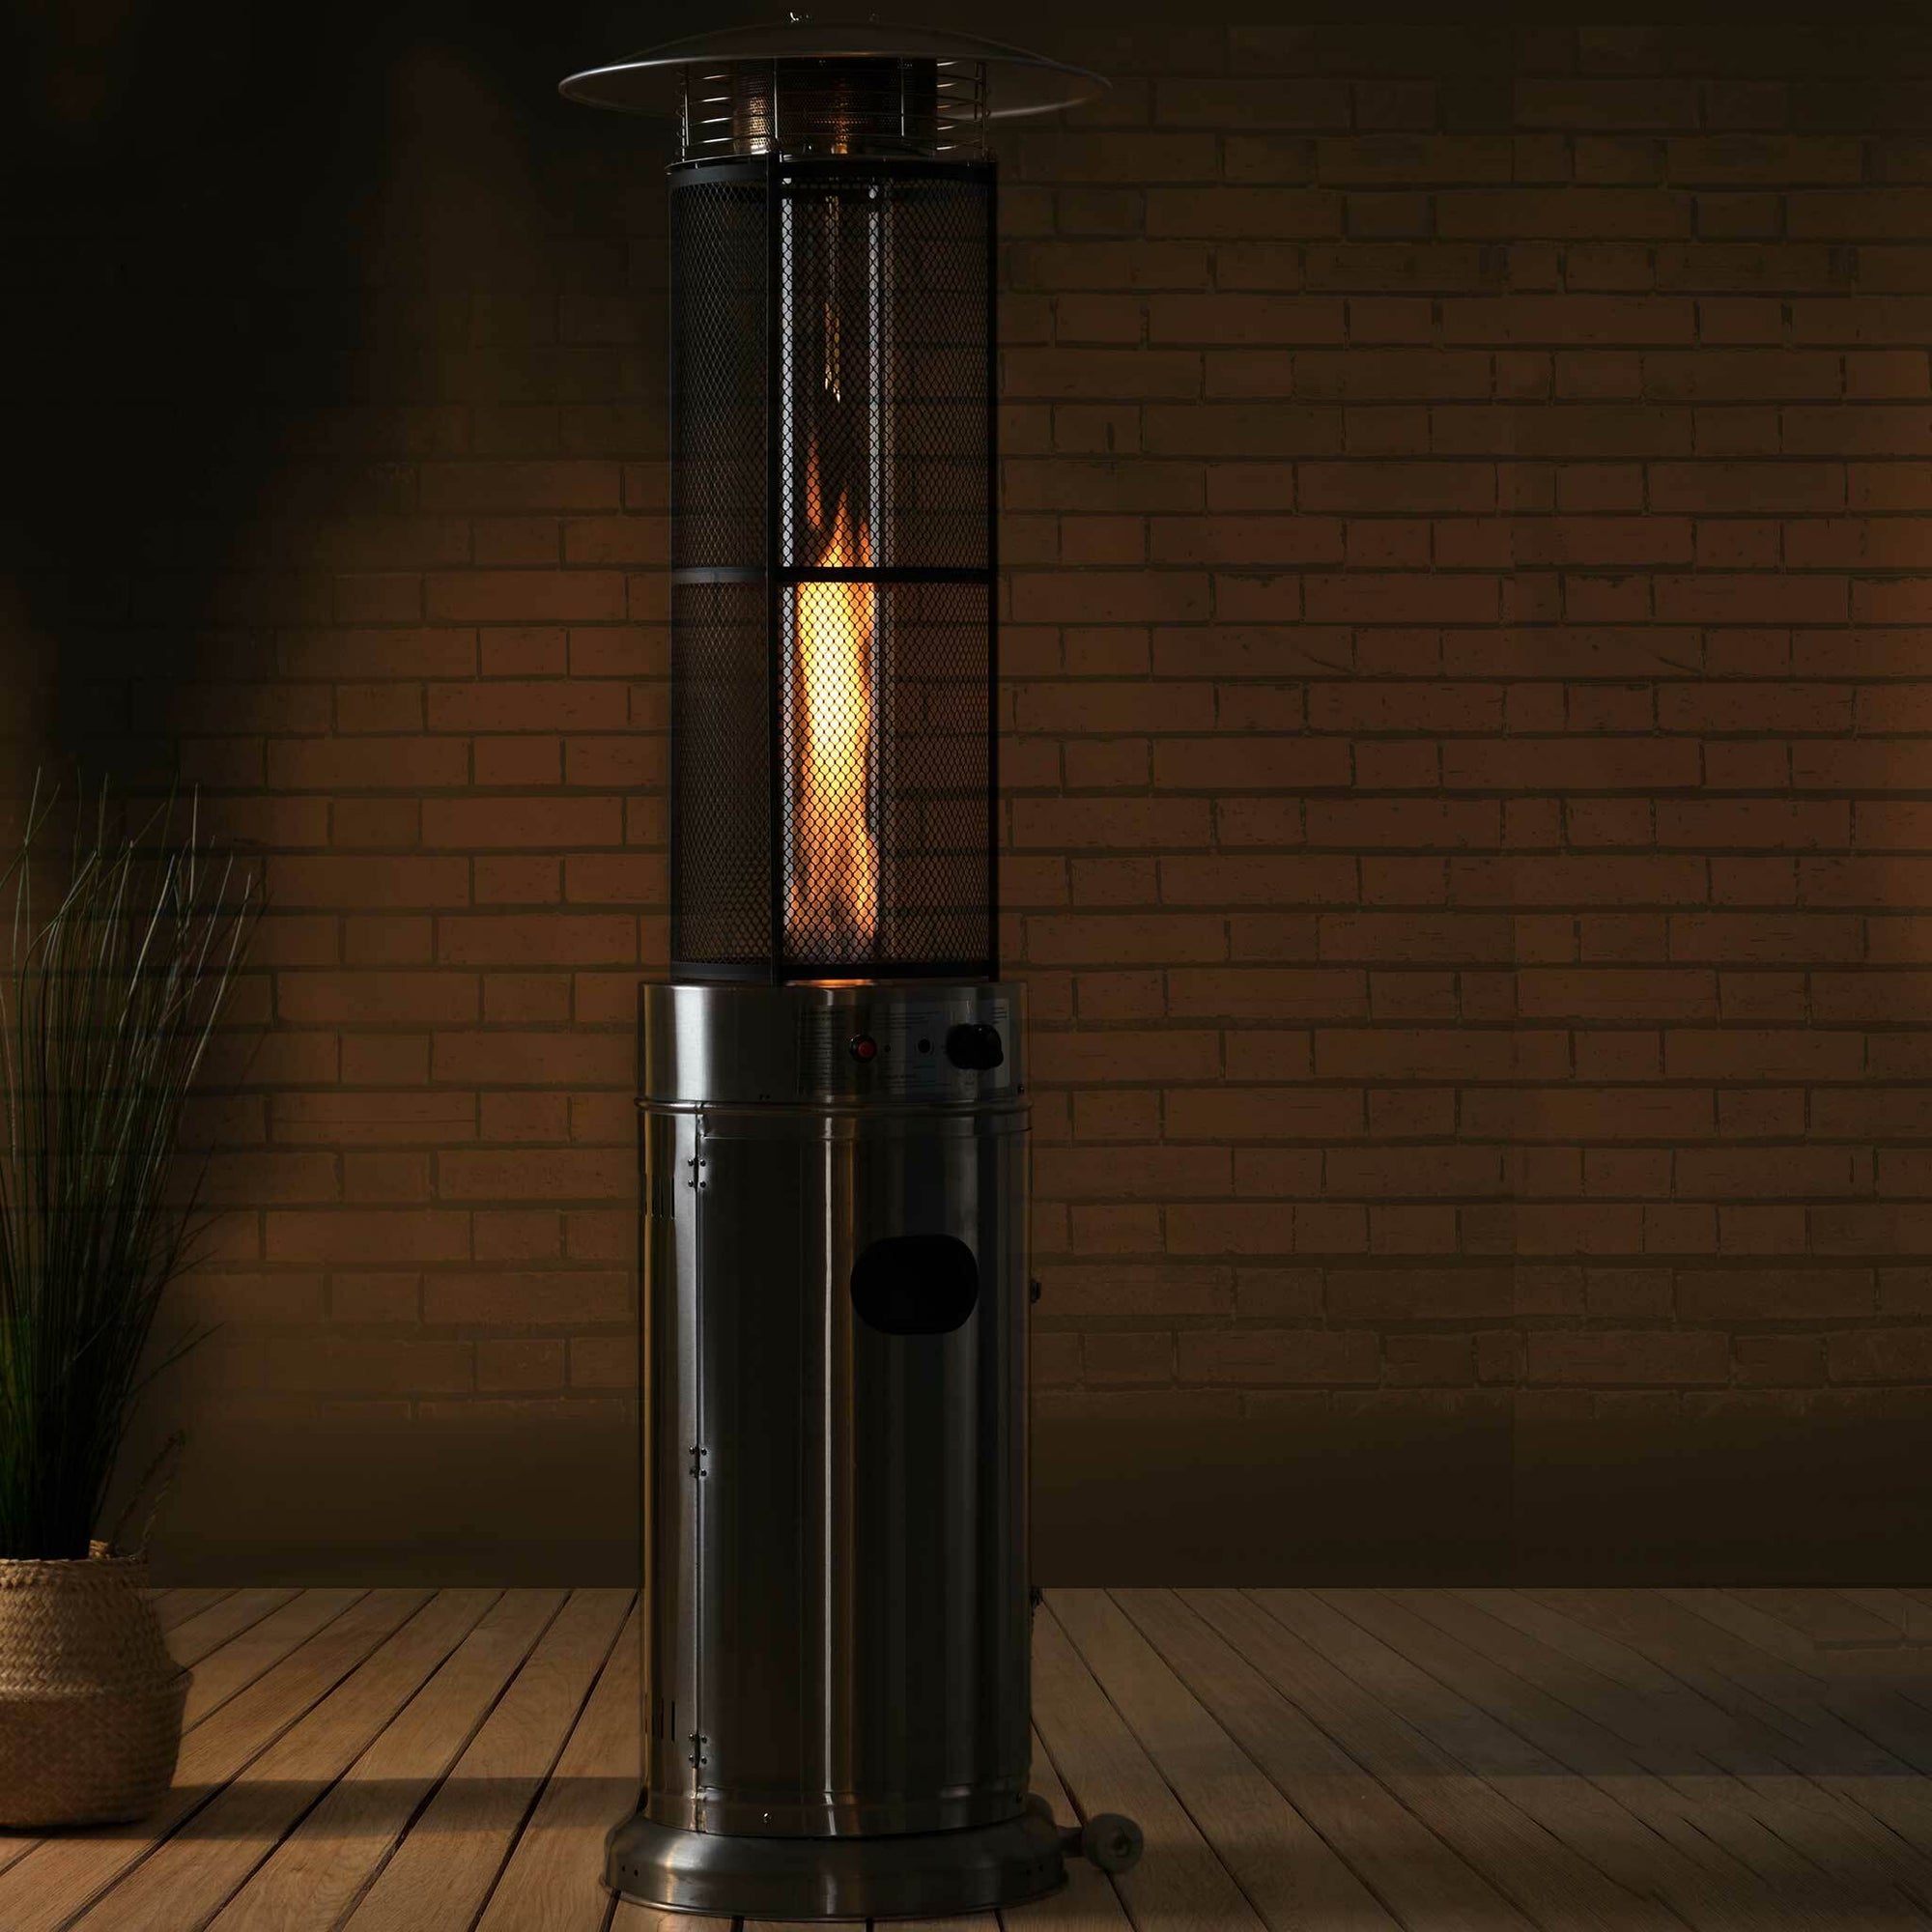 Fornorth Patio Heater Round Tube 11kW gas powered, stainless Steel